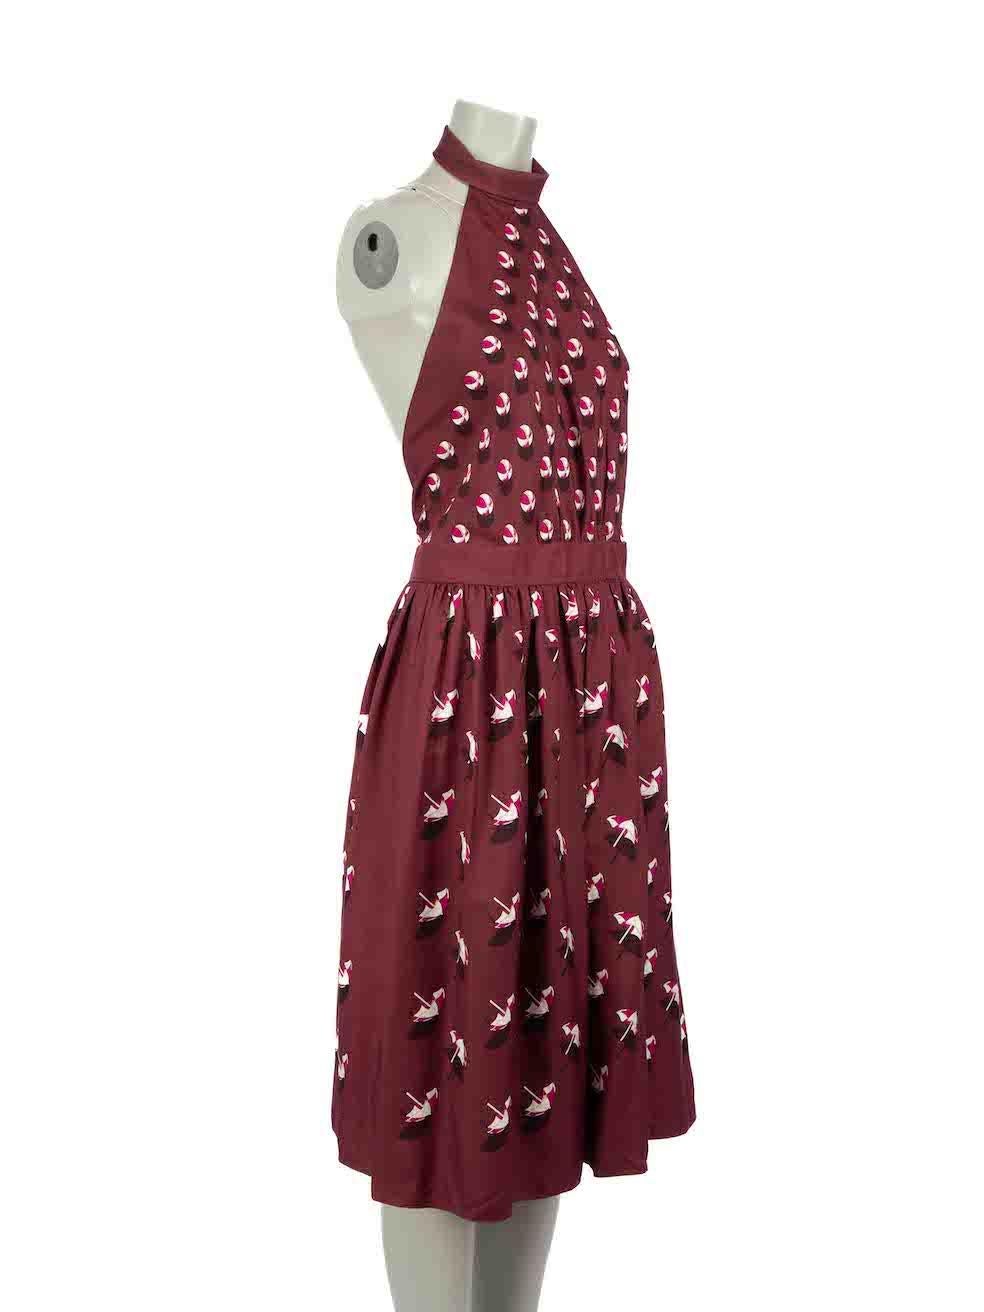 CONDITION is Very good. Minimal wear to dress is evident. Minimal wear to halter neckline where scuff mark is evident on this used Gucci designer resale item.
 
Details
Burgundy
Silk
Dress
Ball and umbrella print
Button halter neck
Open back
Midi
2x